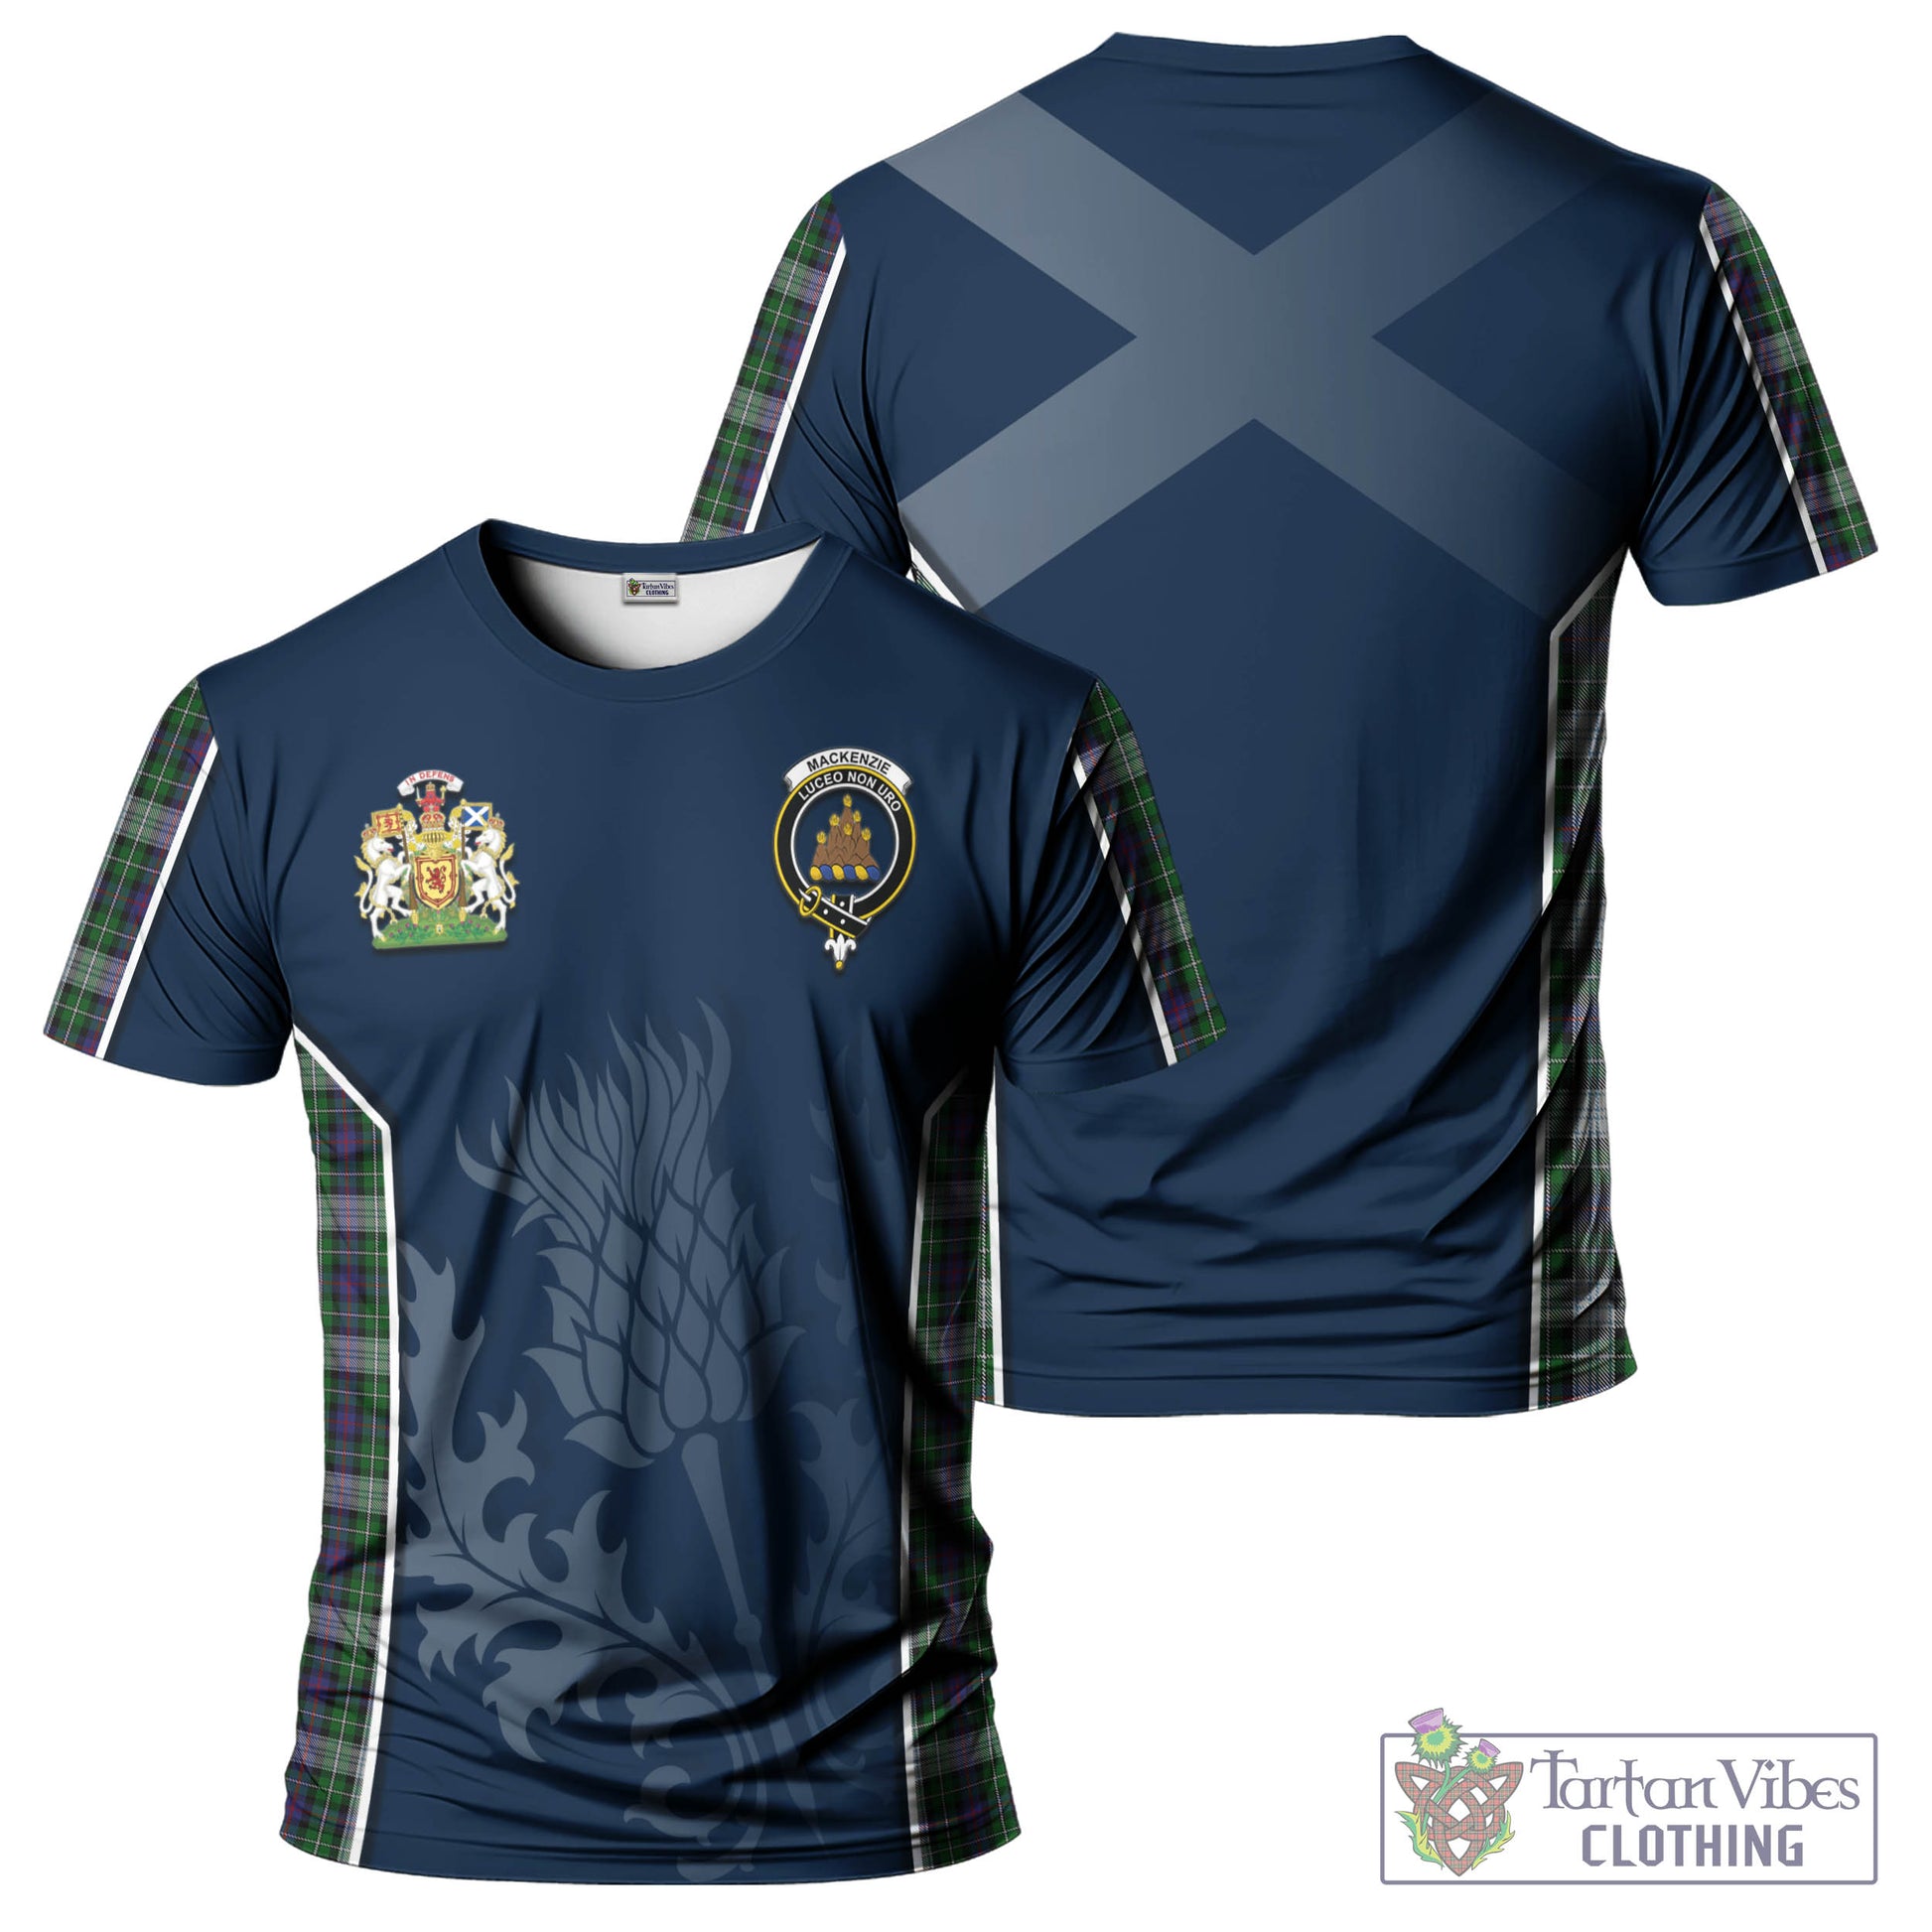 Tartan Vibes Clothing MacKenzie Dress Tartan T-Shirt with Family Crest and Scottish Thistle Vibes Sport Style